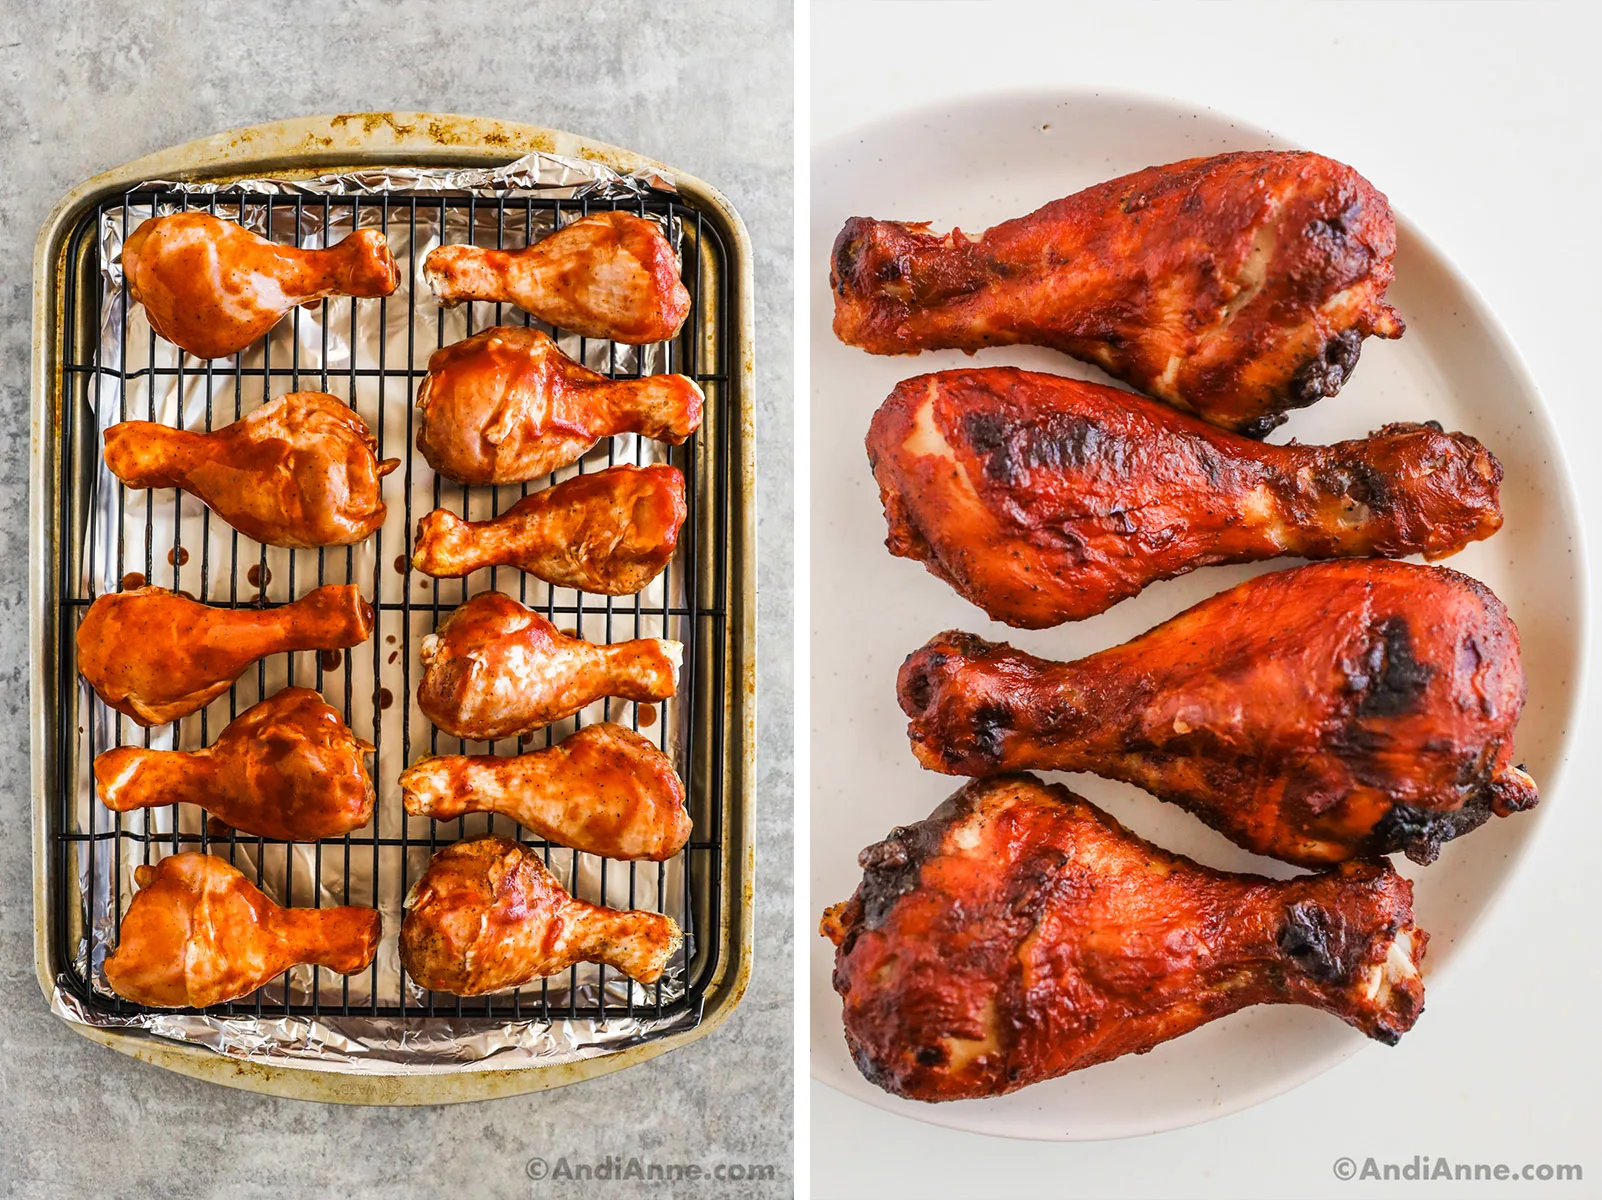 Two images, first is raw chicken legs covered in sauce on a baking sheet with rack. Second is cooked sweet and sour chicken legs on a plate.